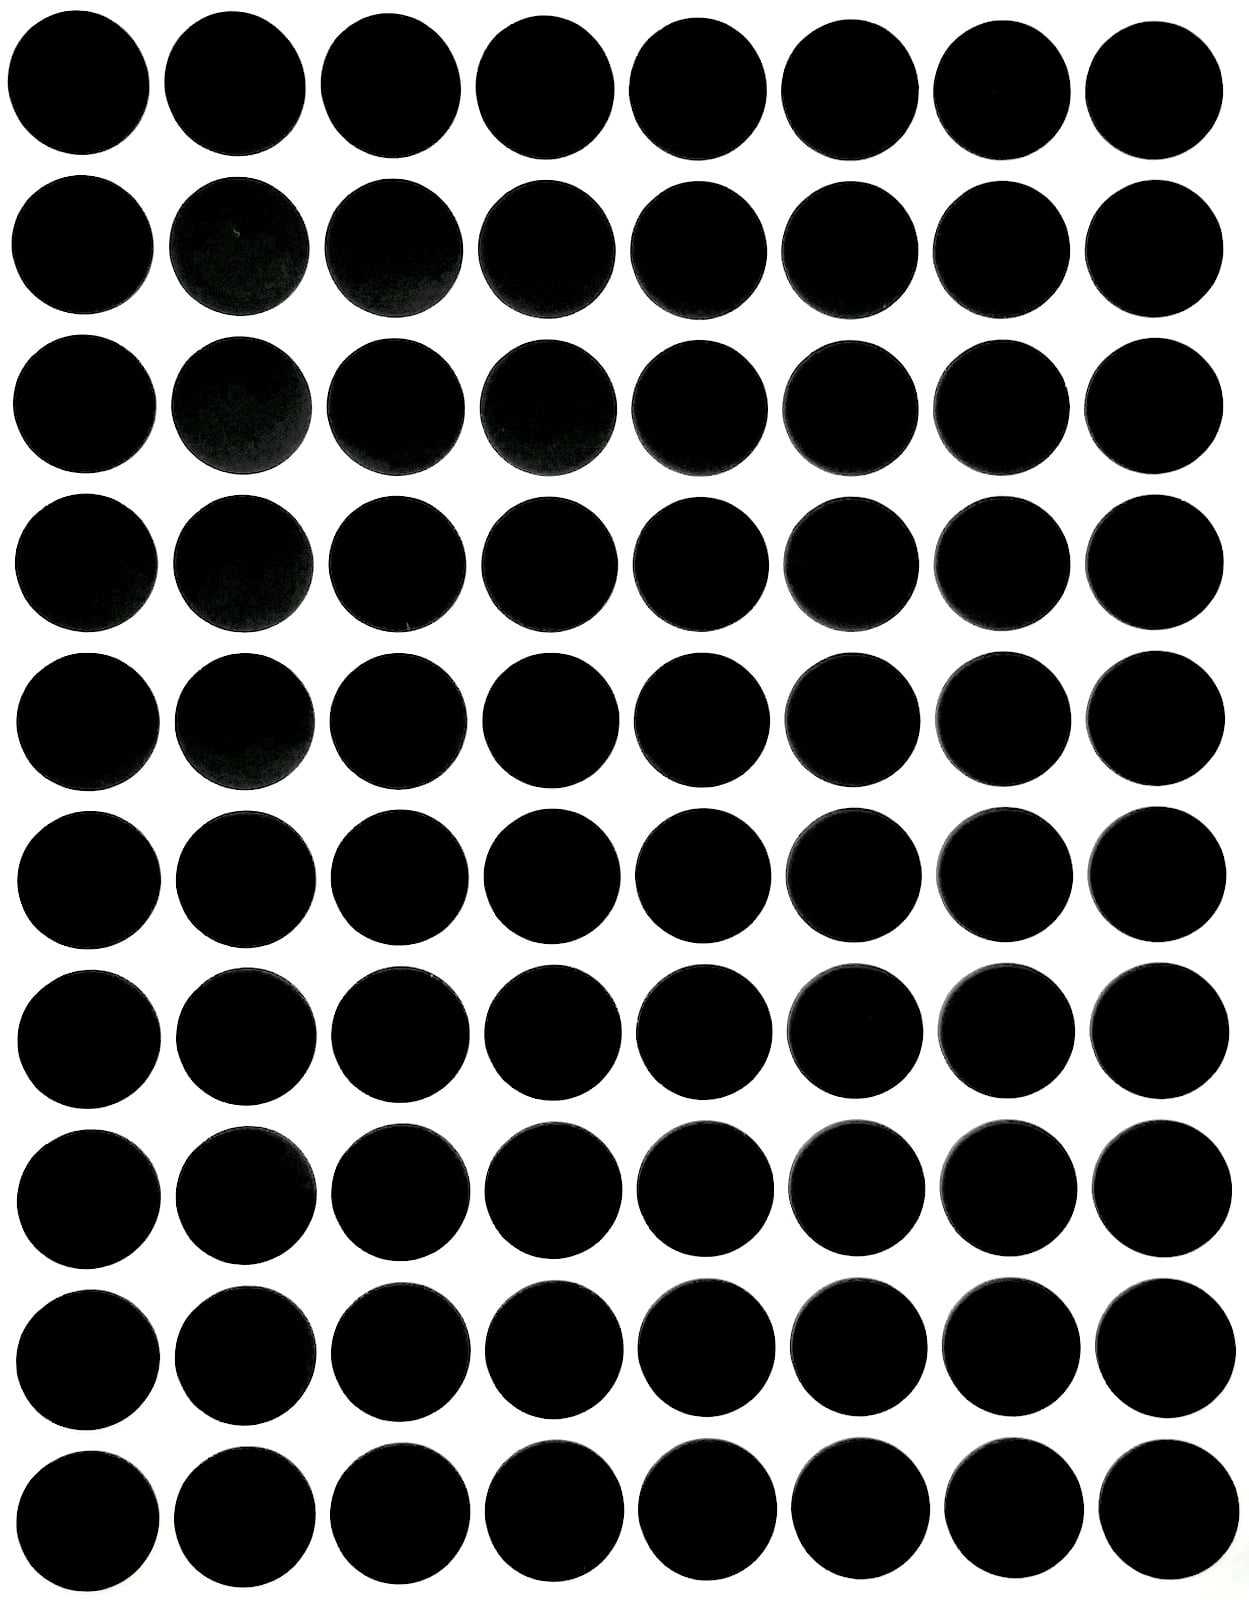 Self-Adhesive 13mm Try ME Round Black Print on White Choice of Price or Text Small Circular Pricing 0.5 inch Retail & Merchandising Labels